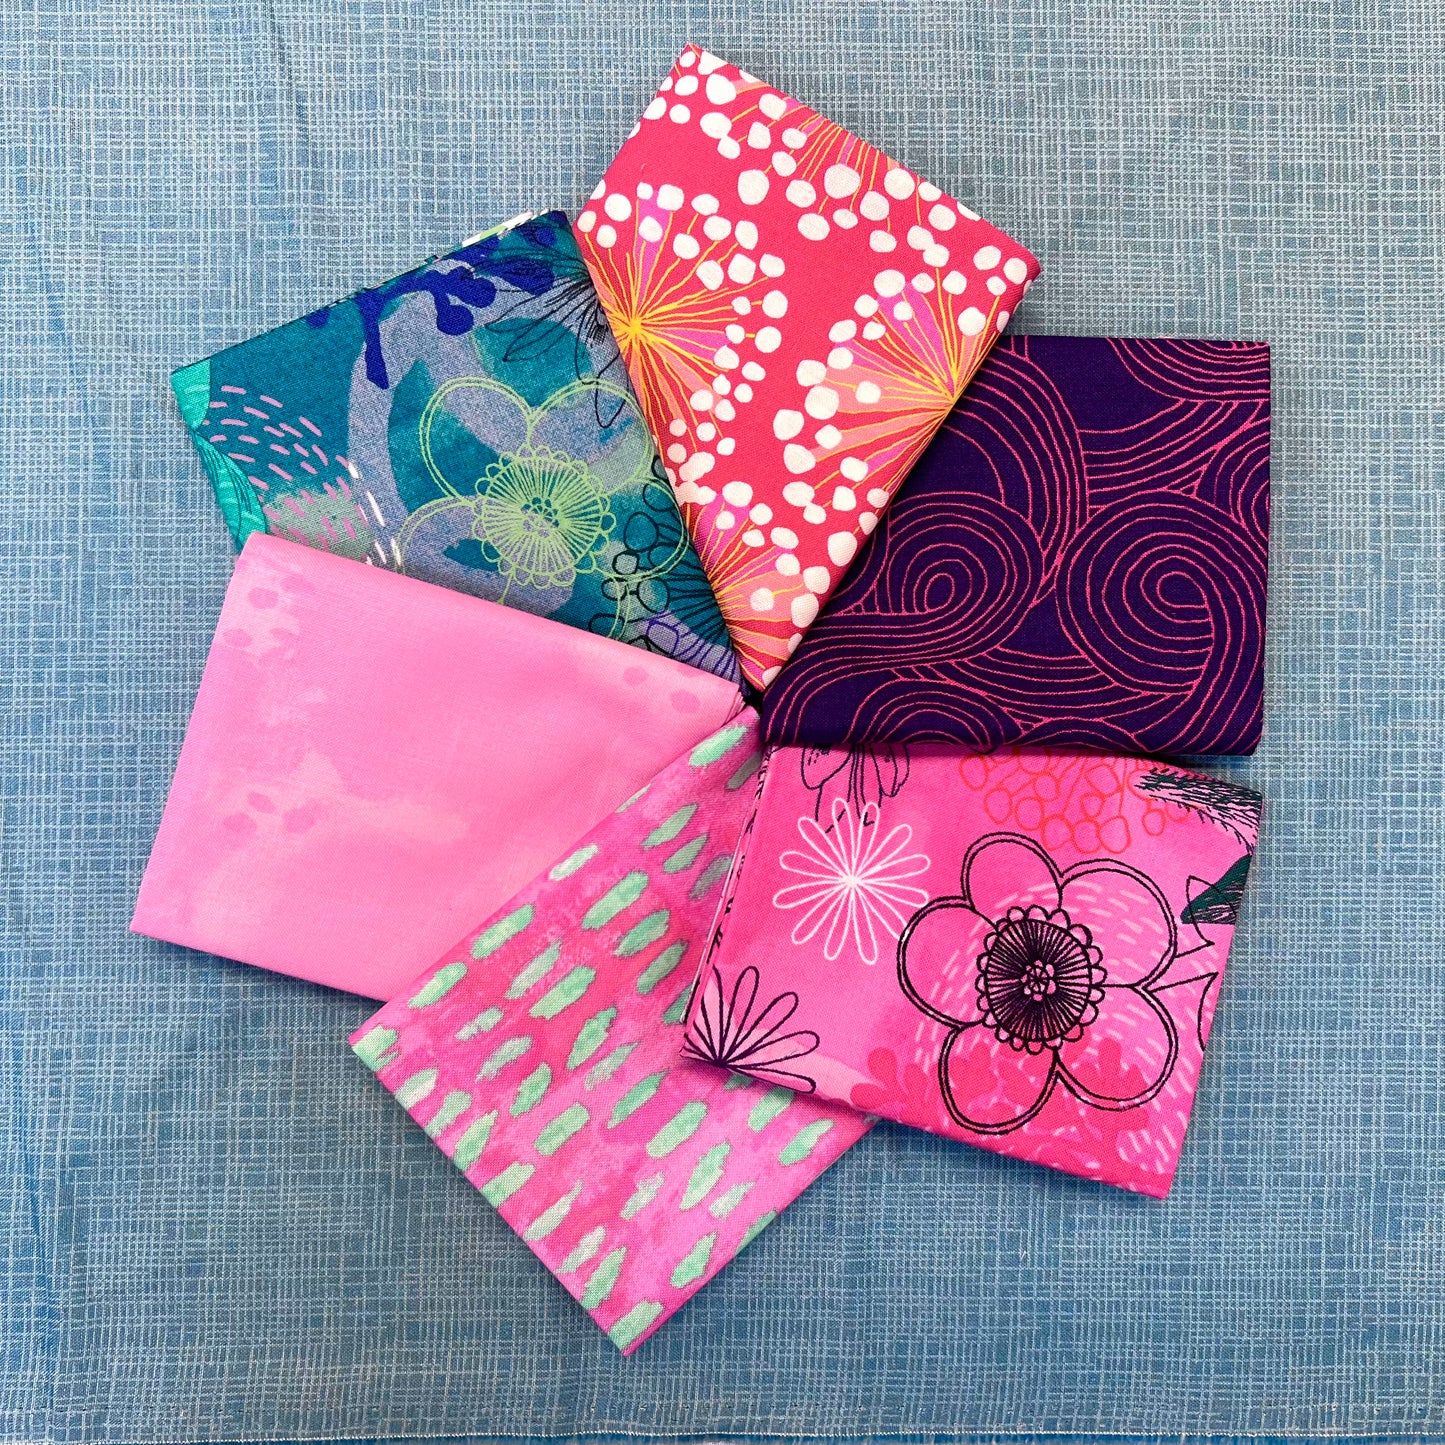 6 fat quarter pack of Bright Pinks